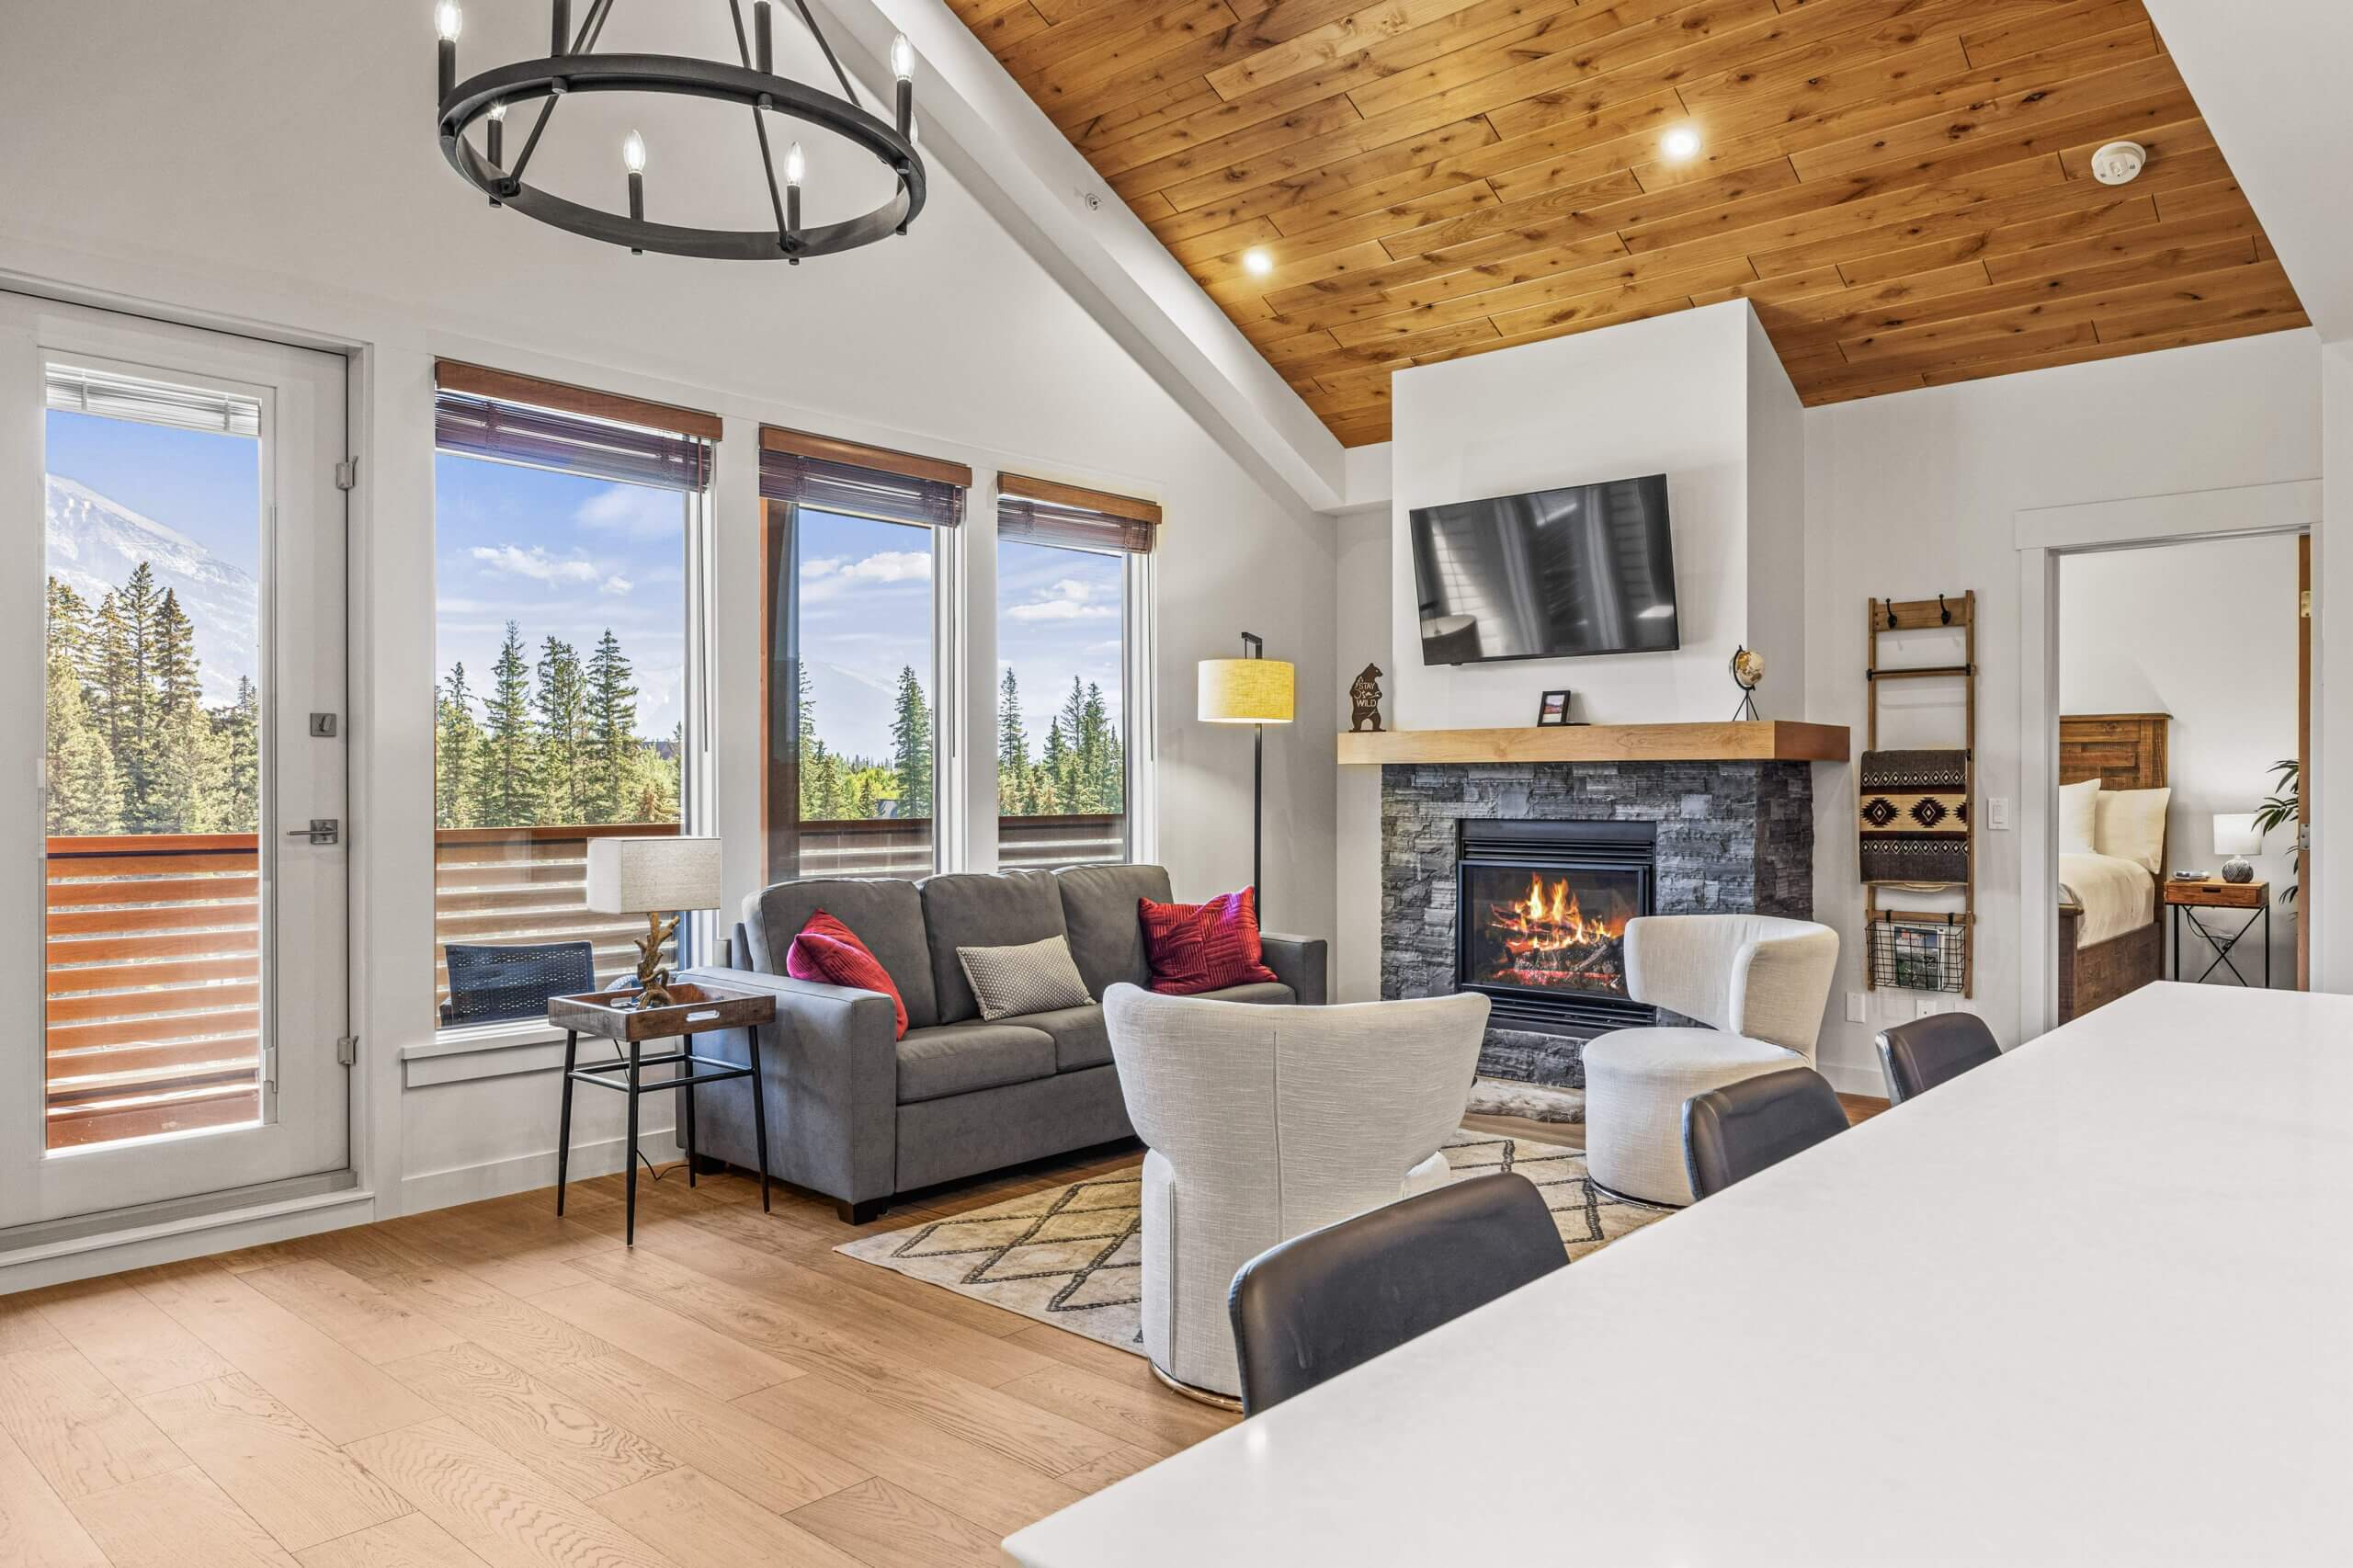 An open concept living room with a comfortable couch, hardwood floors, large bright windows and cozy fireplace in a Spring Creek Vacations' vacation rental in Canmore Alberta.